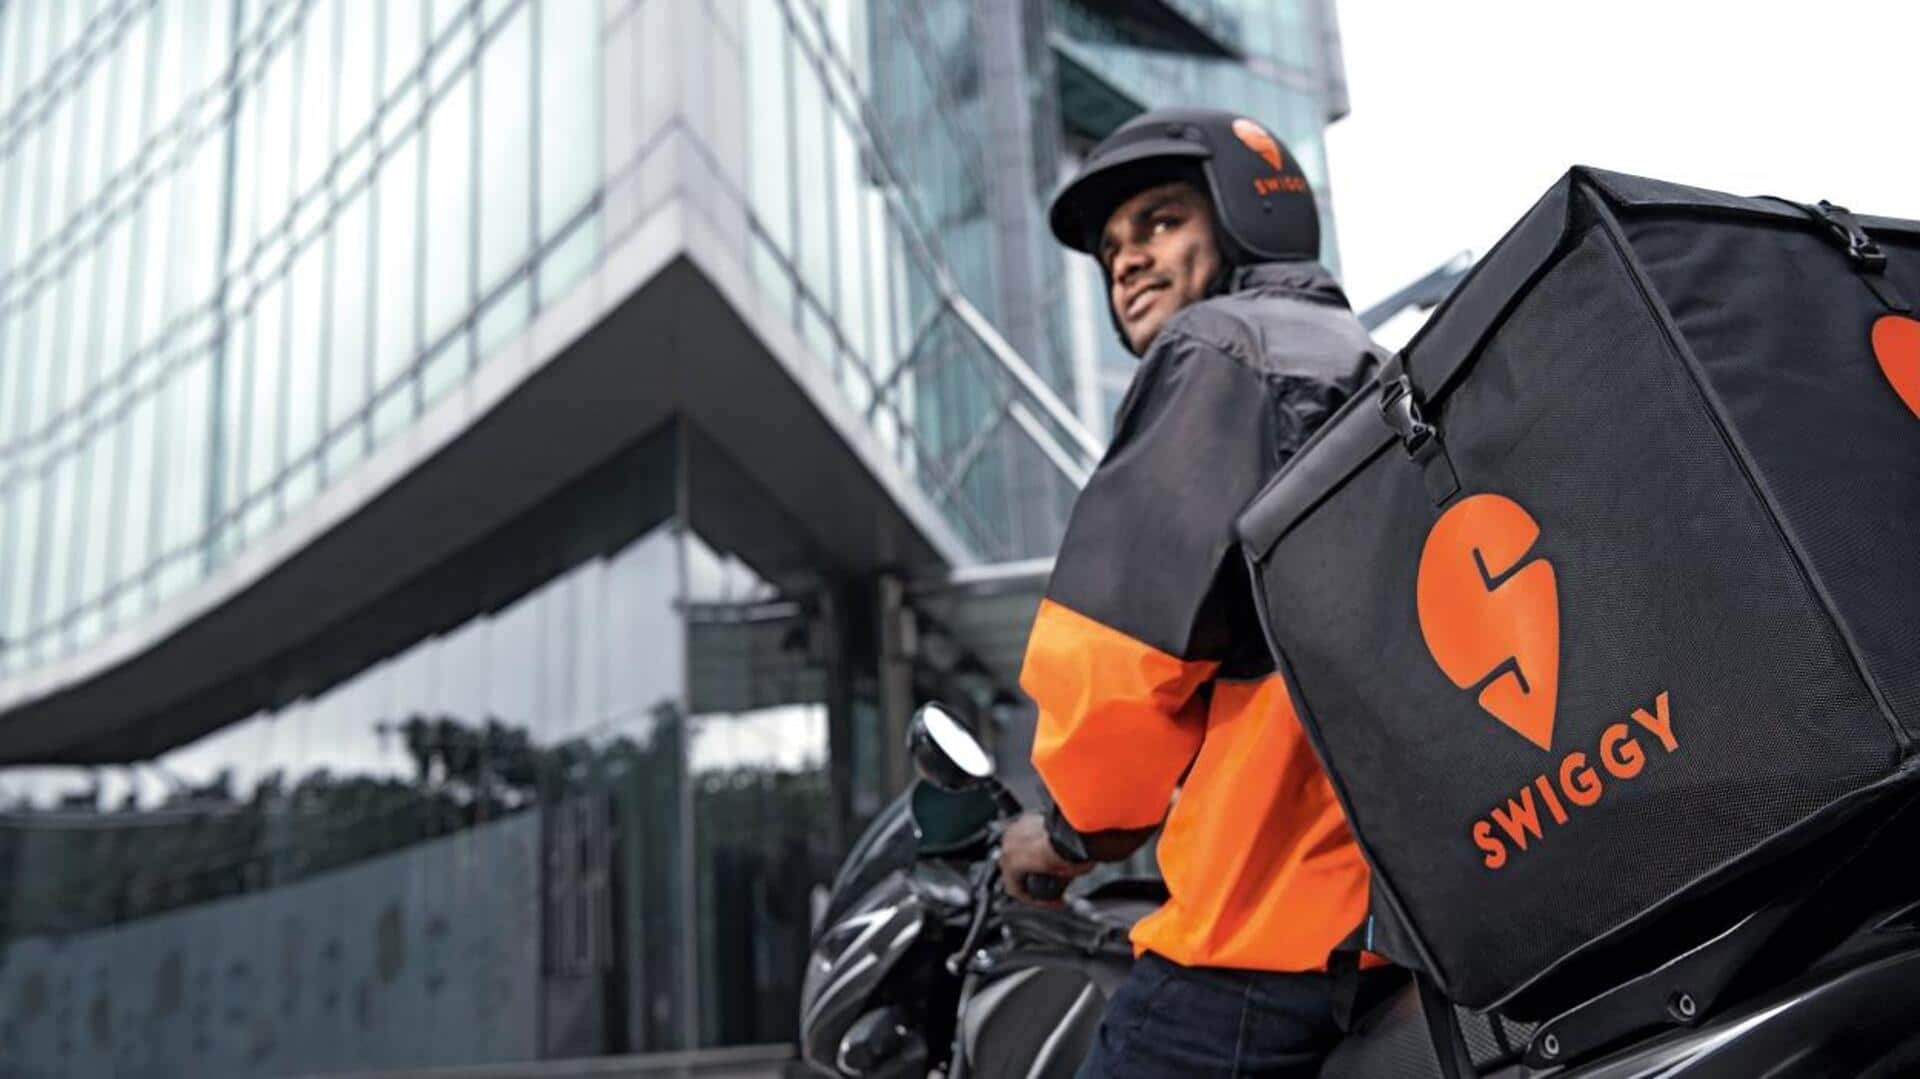 Swiggy's 2% collection fee causing dispute with restaurants: Here's why